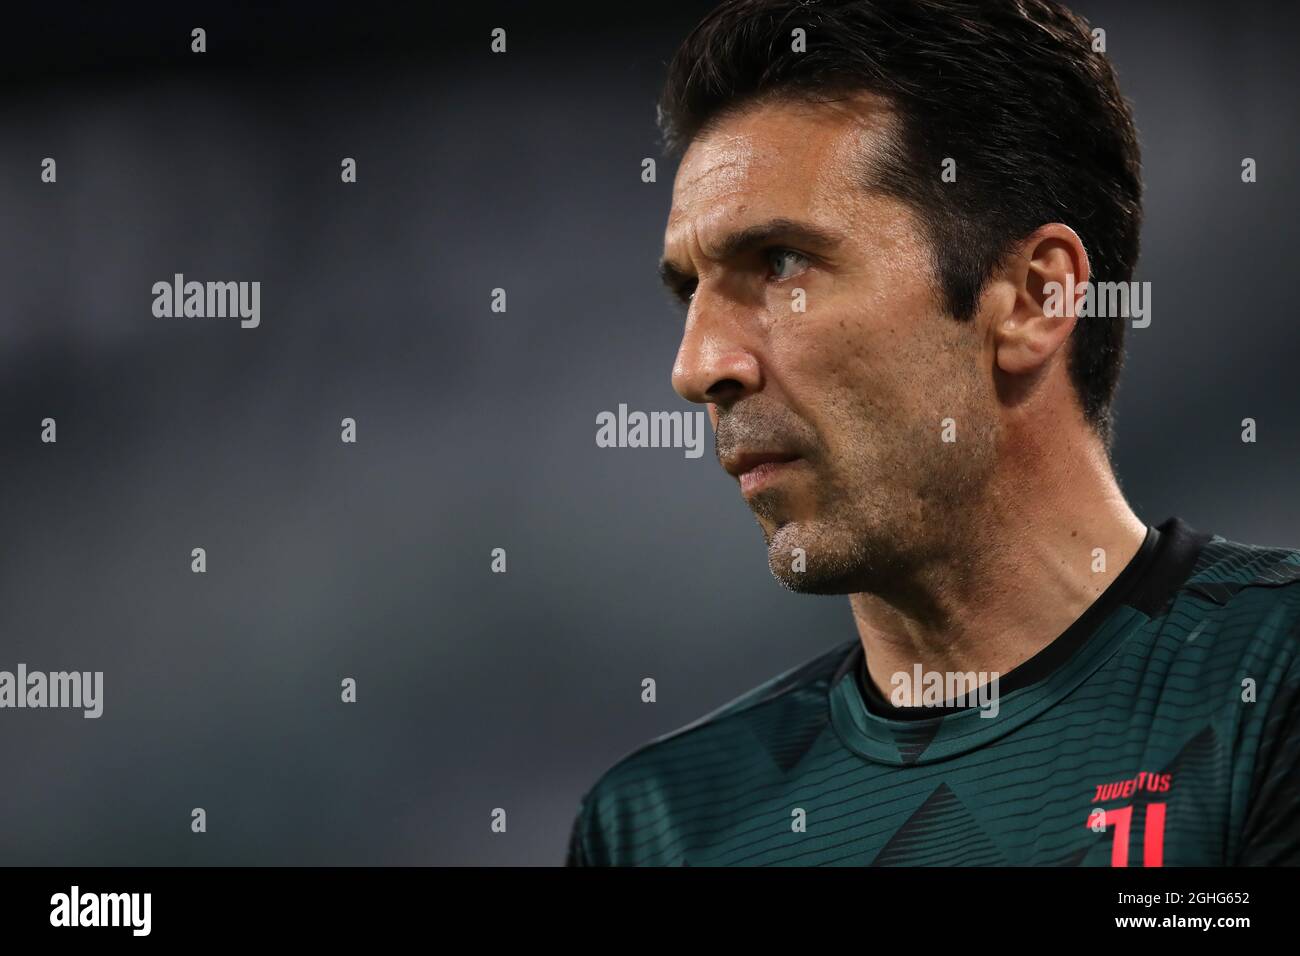 Juventus's Italian goalkeeper Gianluigi Buffon during the Serie A match at Allianz Stadium, Turin. Picture date: 26th June 2020. Picture credit should read: Jonathan Moscrop/Sportimage via PA Images Stock Photo